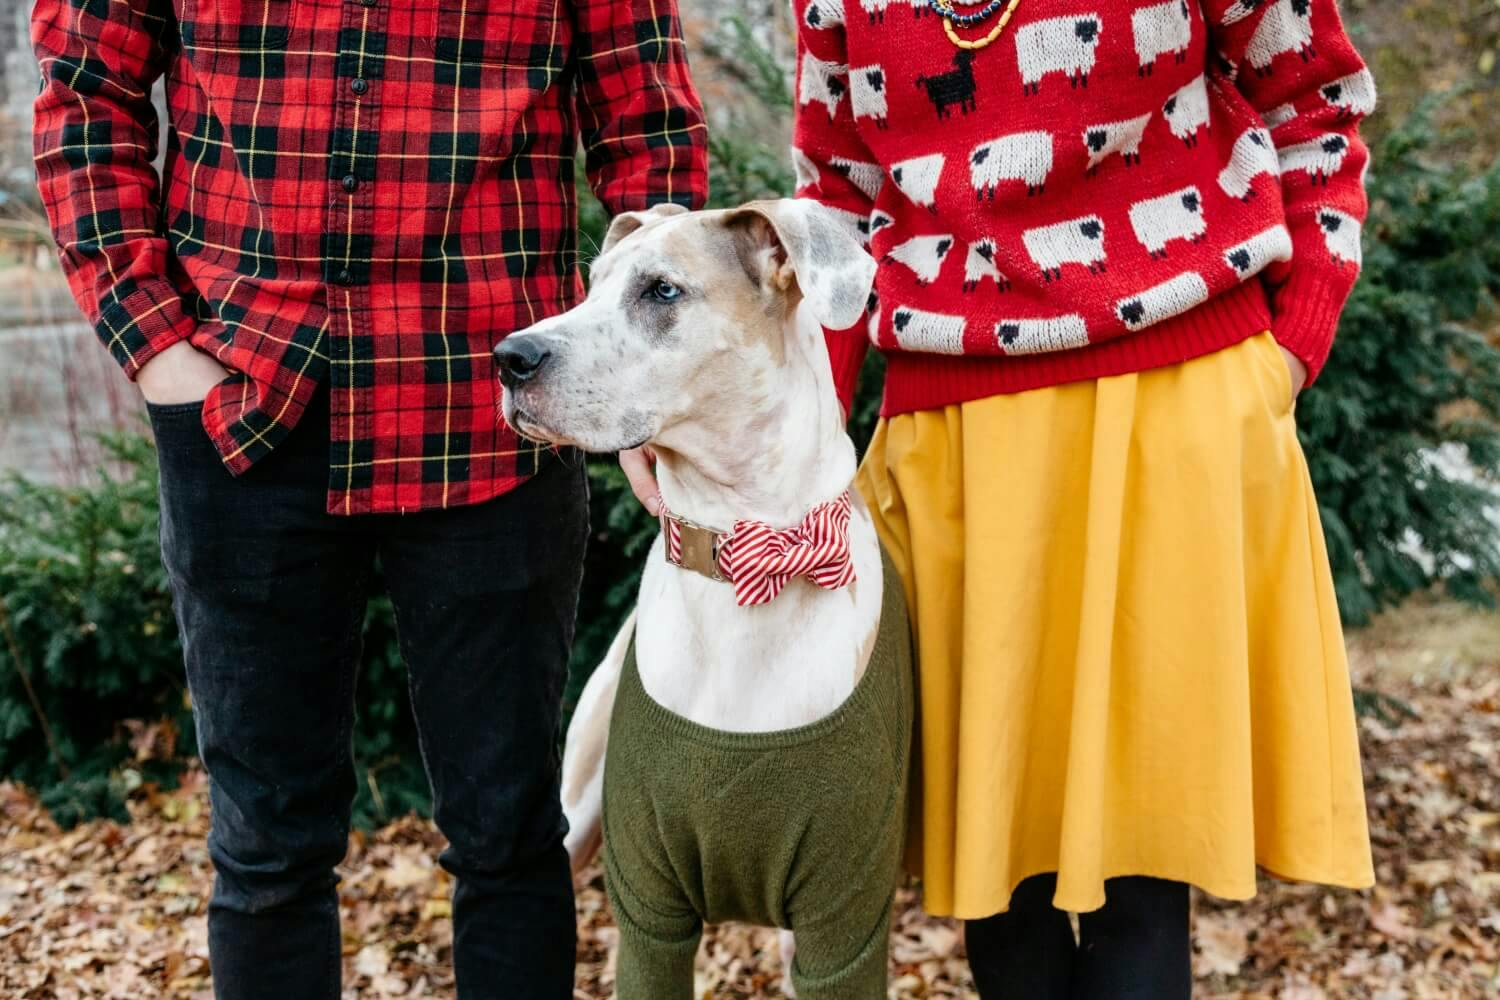 Two people standing with a dog wearing a bow tie between them